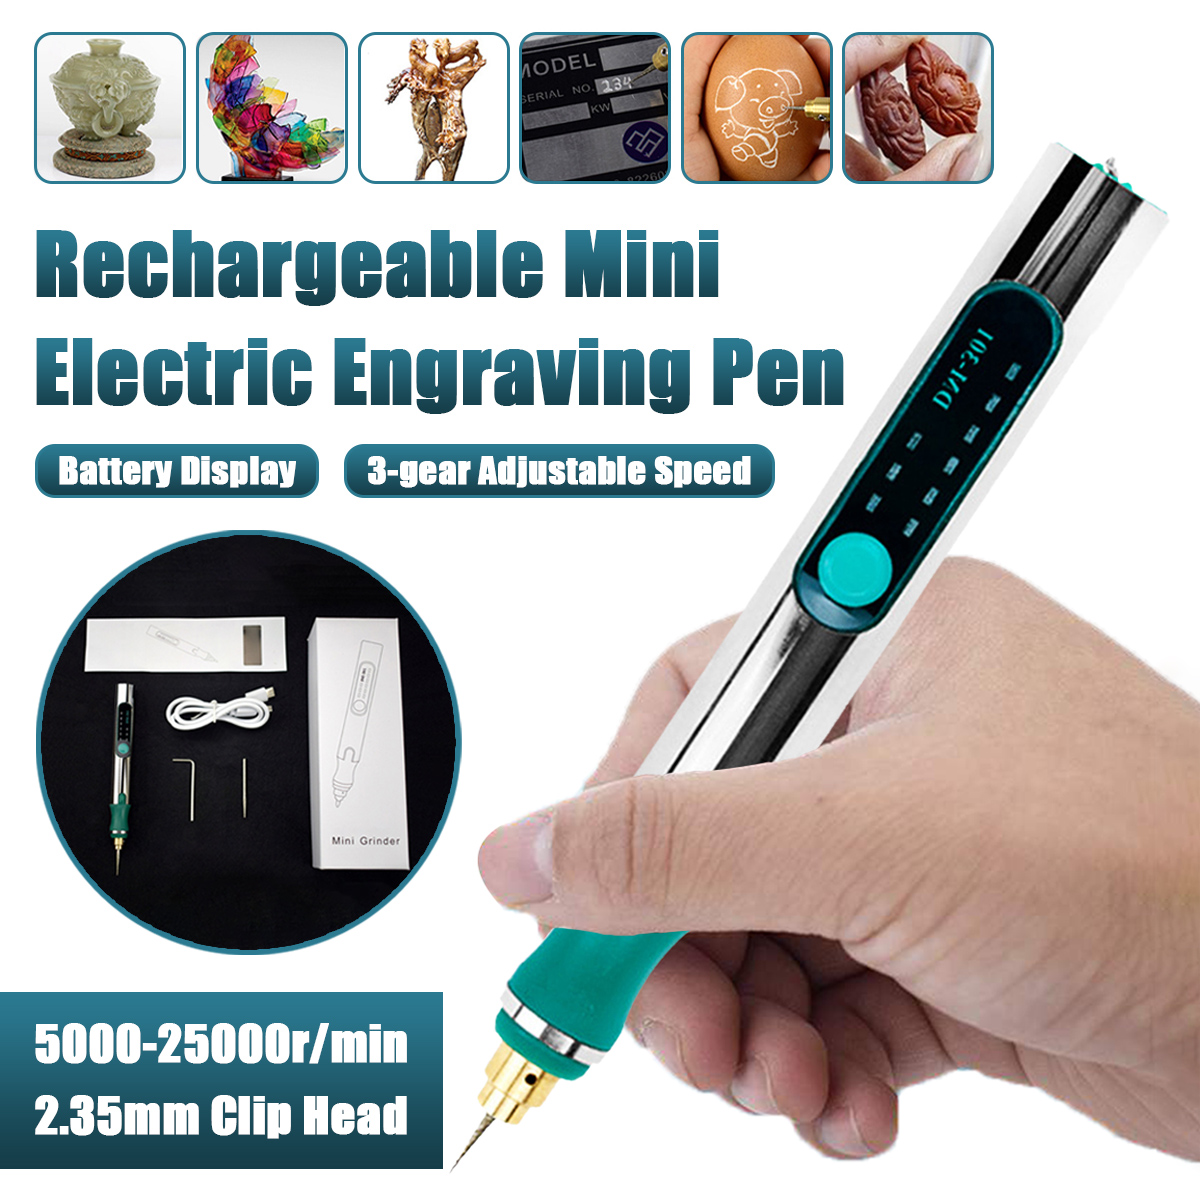 25000RPM-Portable-Mini-Electric-Grinder-3-Gears-Carving-Rotary-Pen-Drill-Engraving-Grinding-Tool-W-B-1875157-1